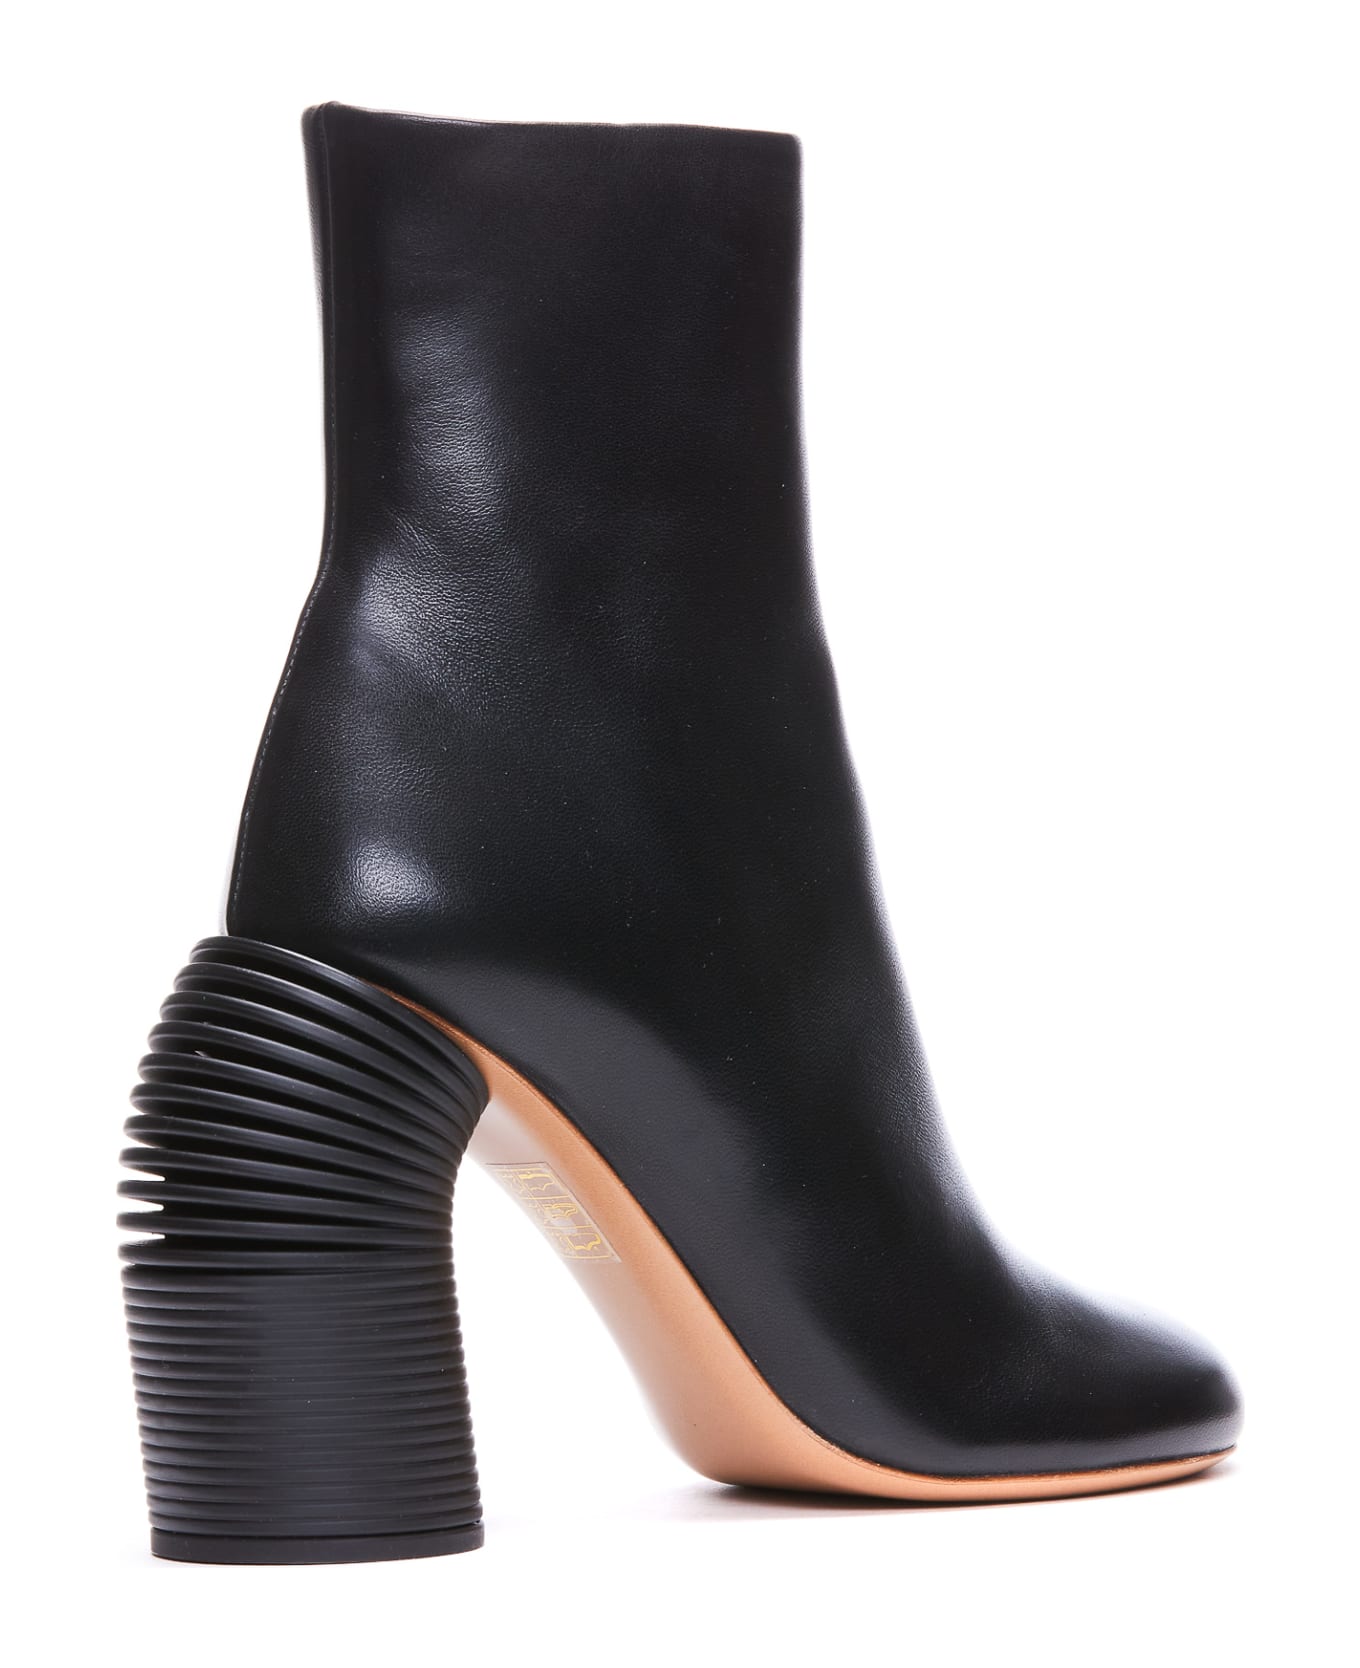 Off-White Spring Ankle Boots - Nero